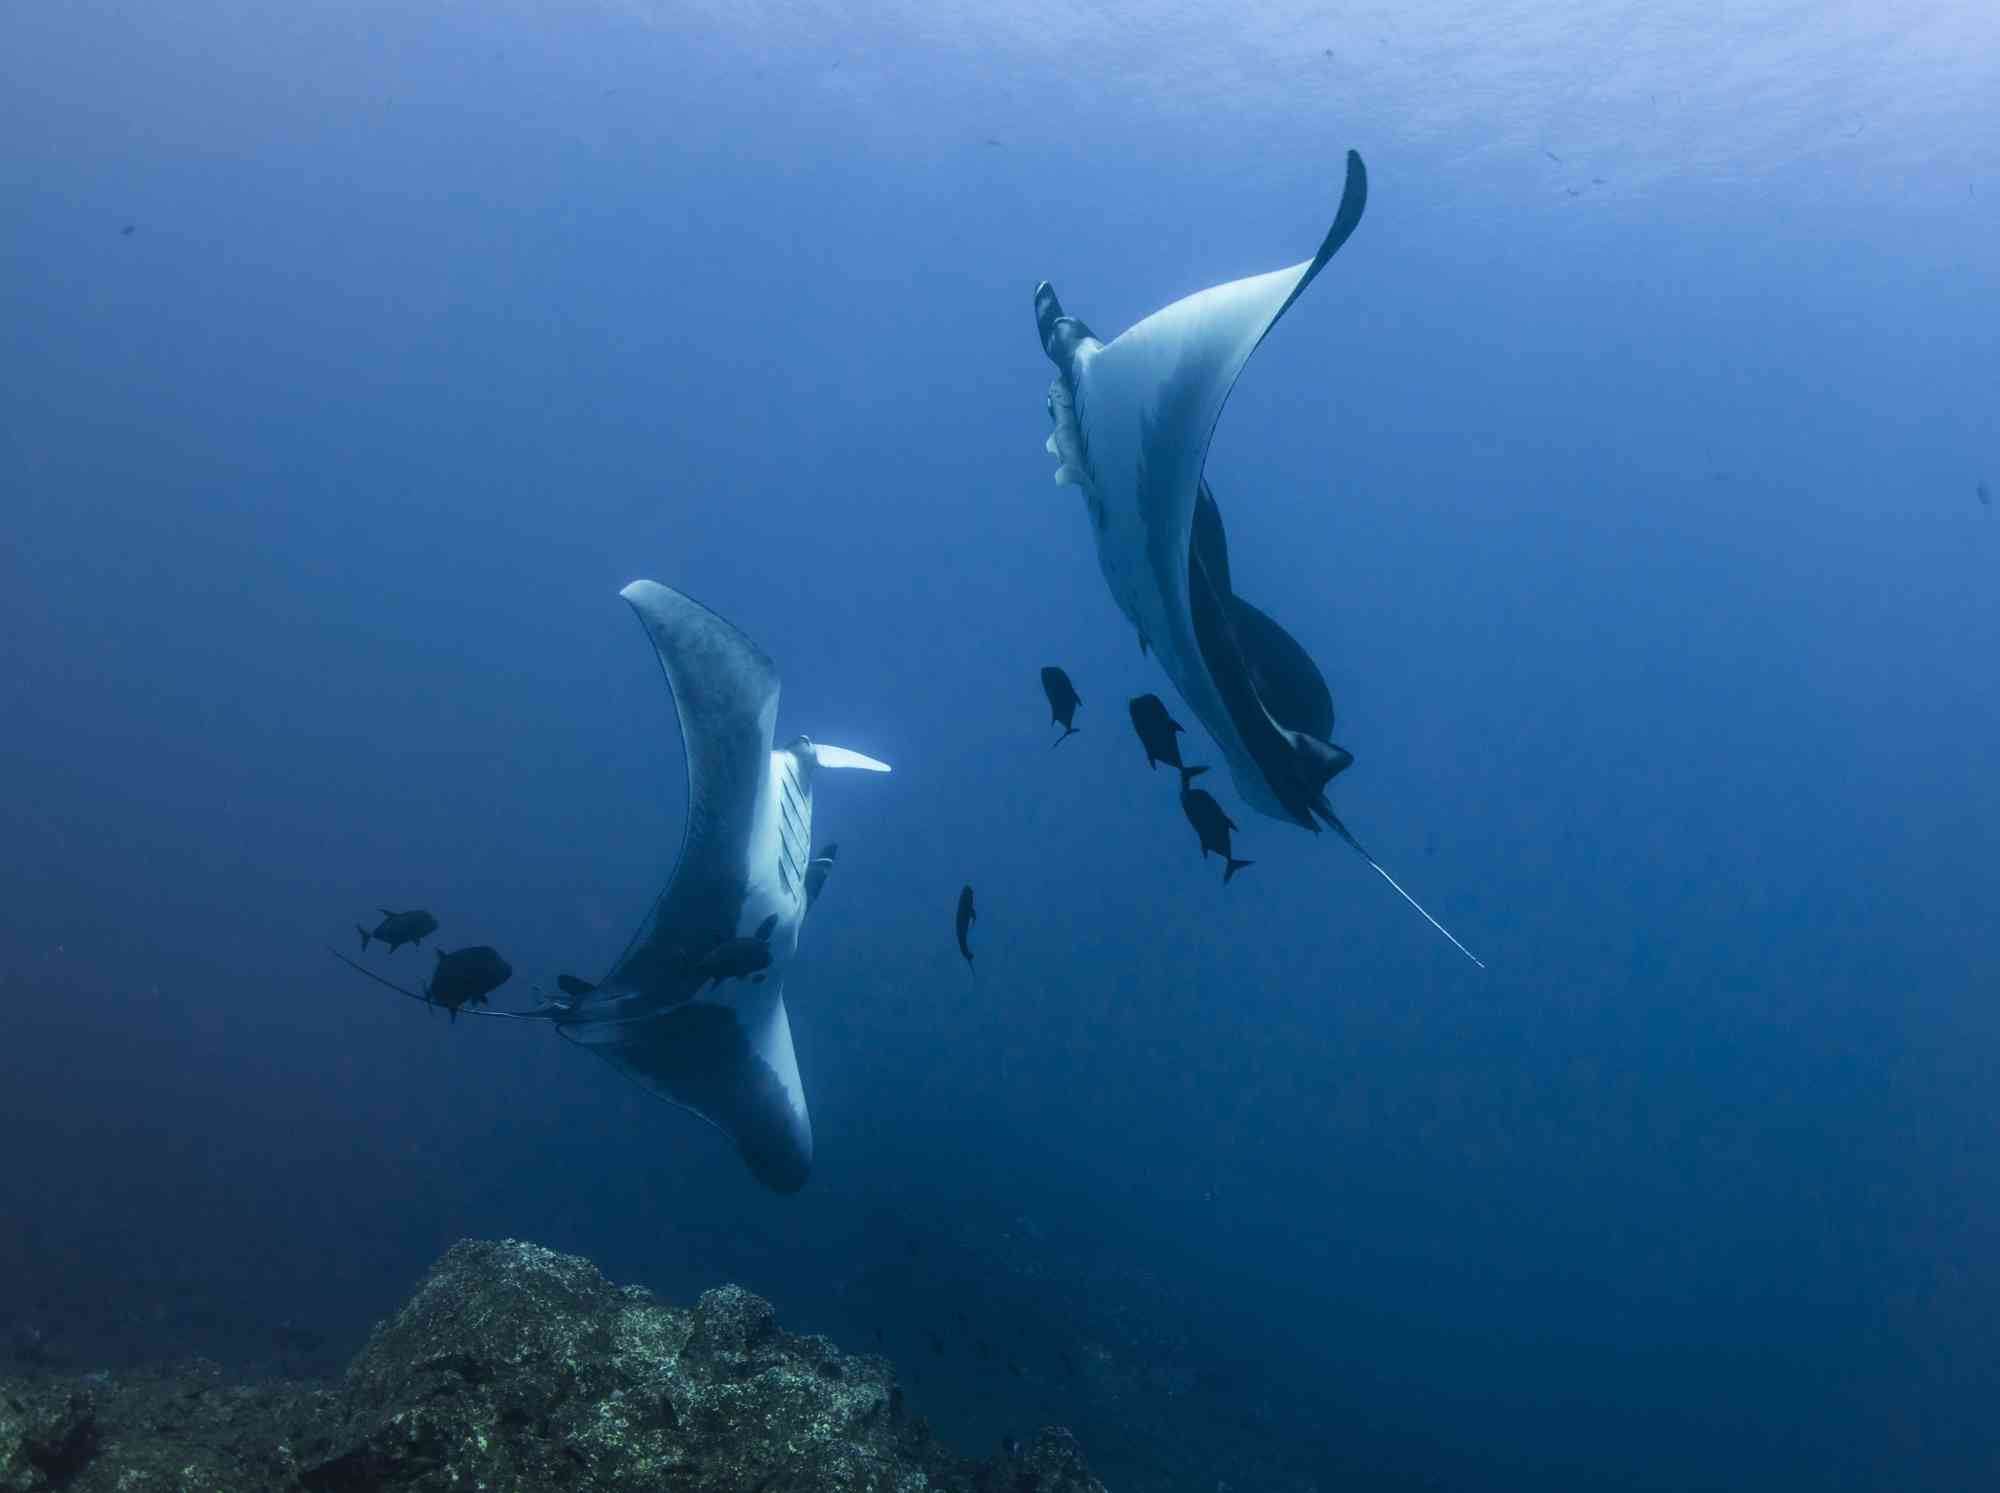 Pair of manta rays mirrioring each other, Revillagigedo Islands, Mexico 